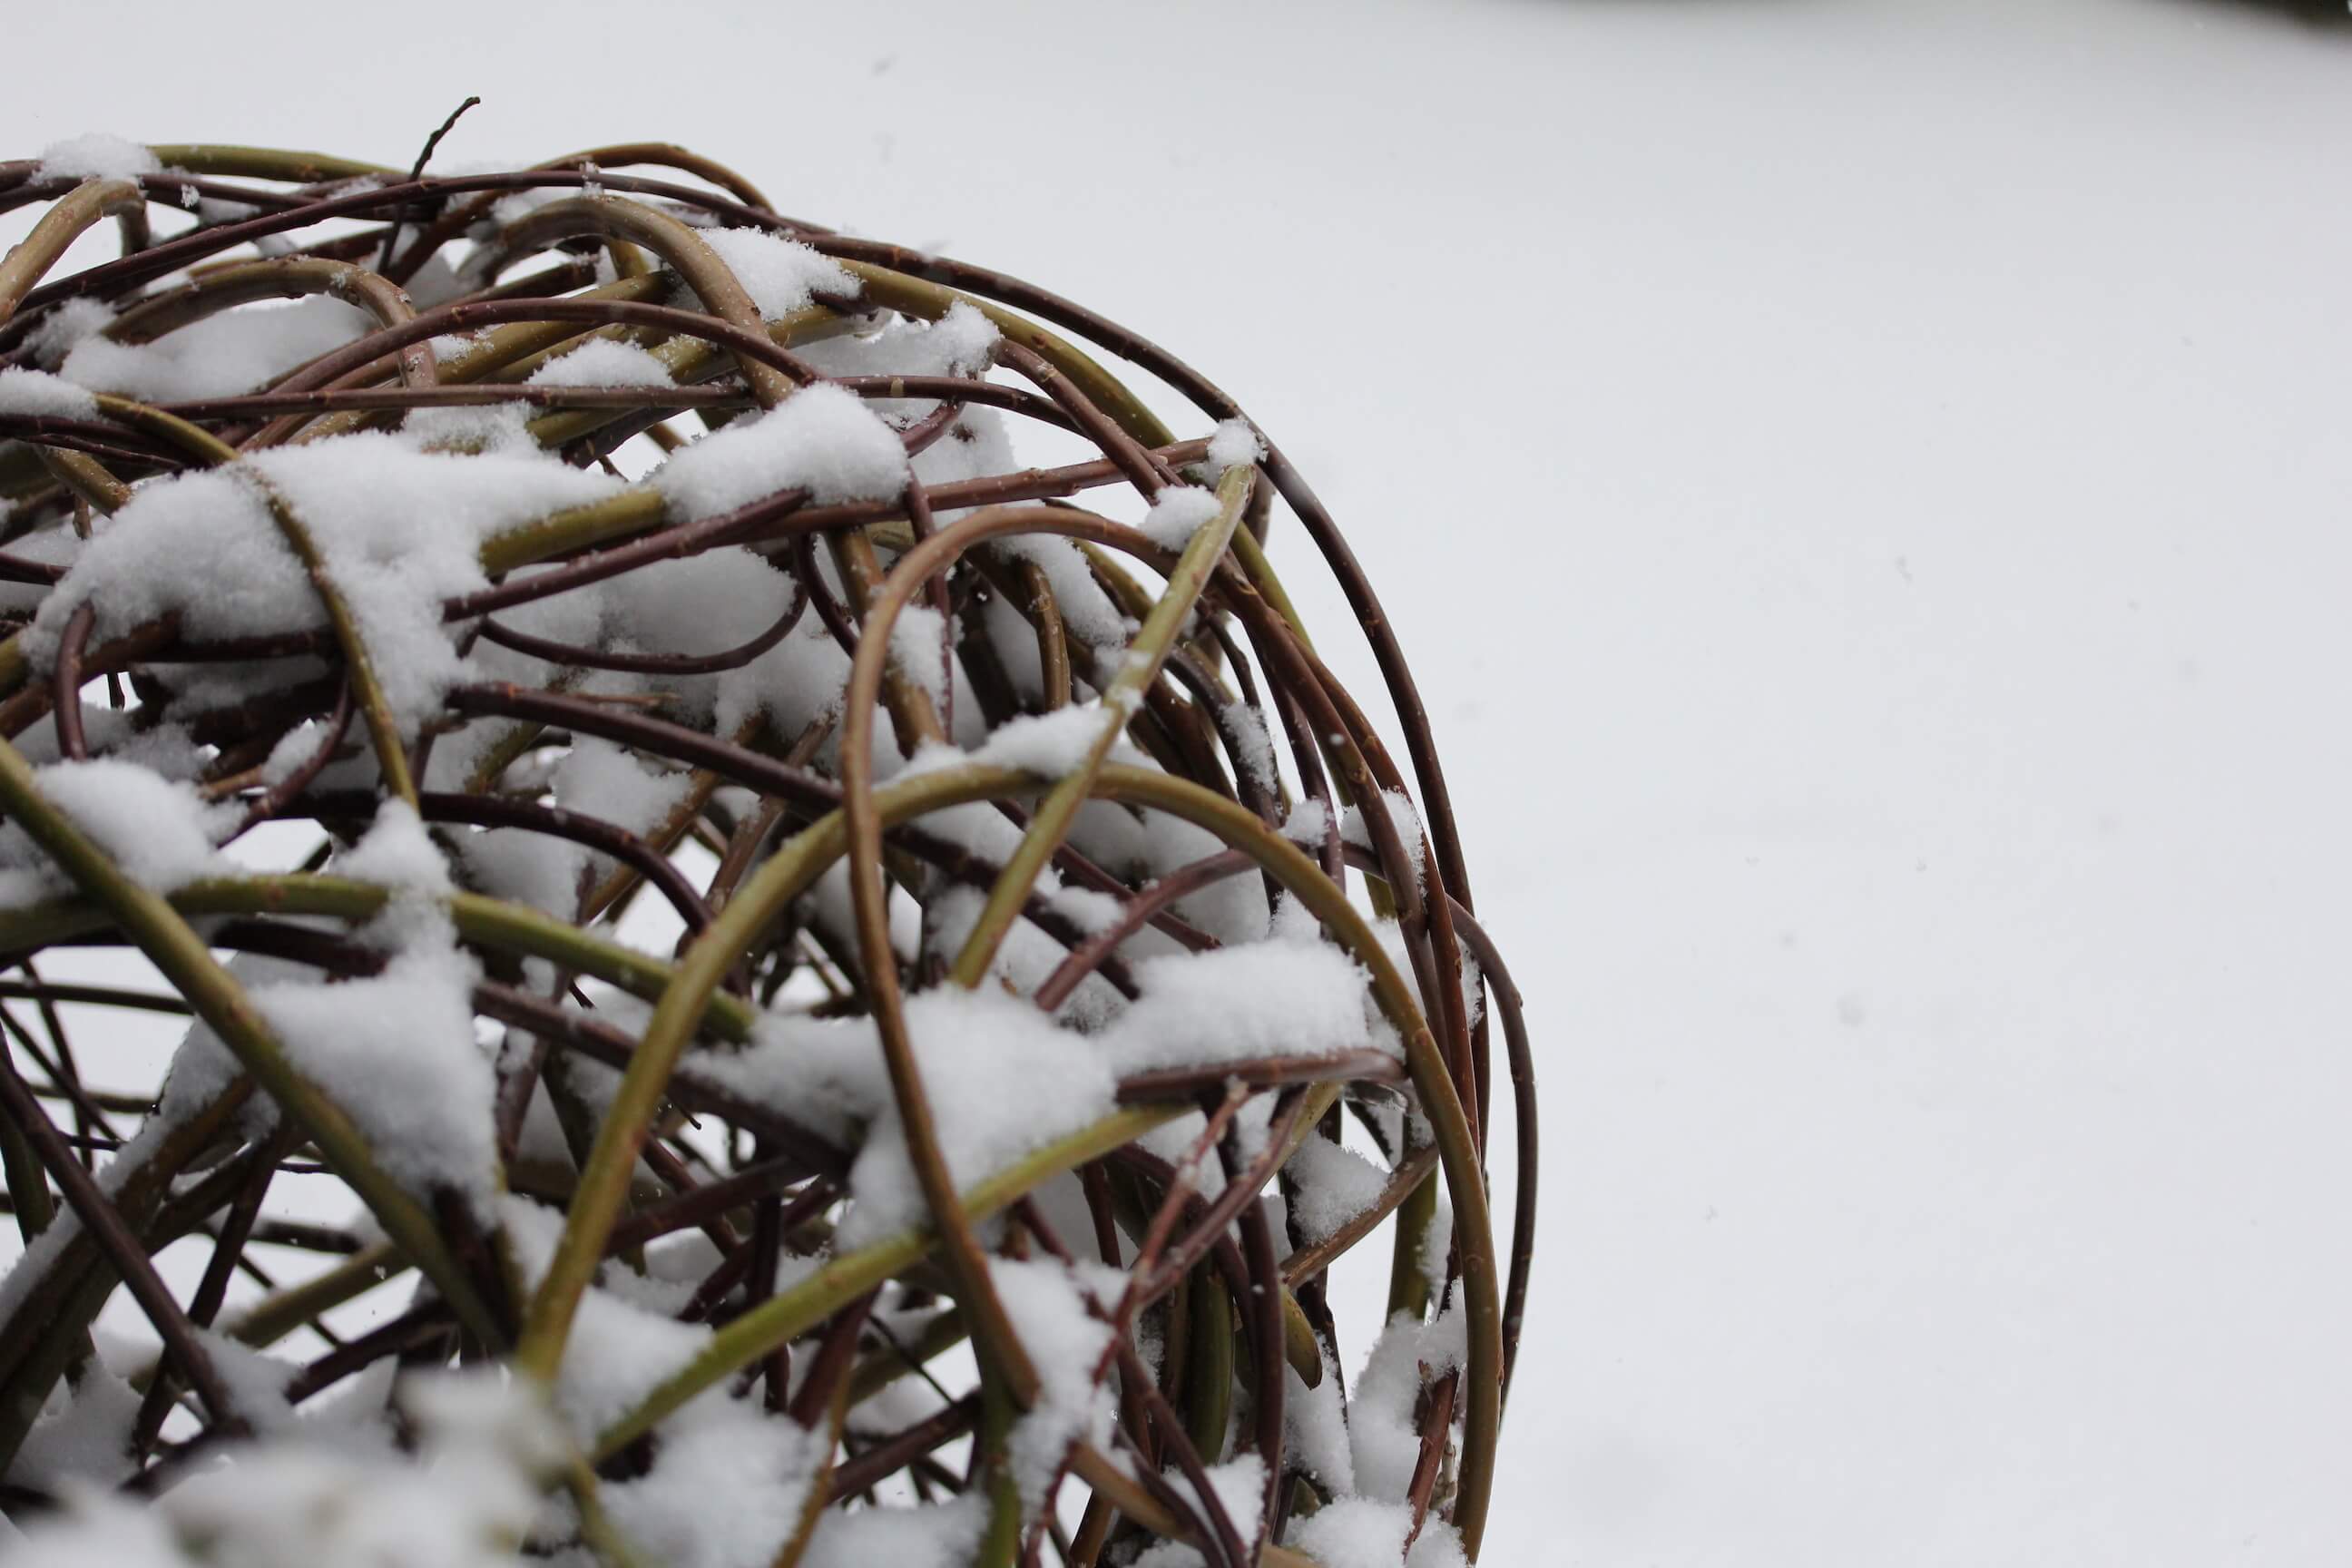 willow knitted ball in snow